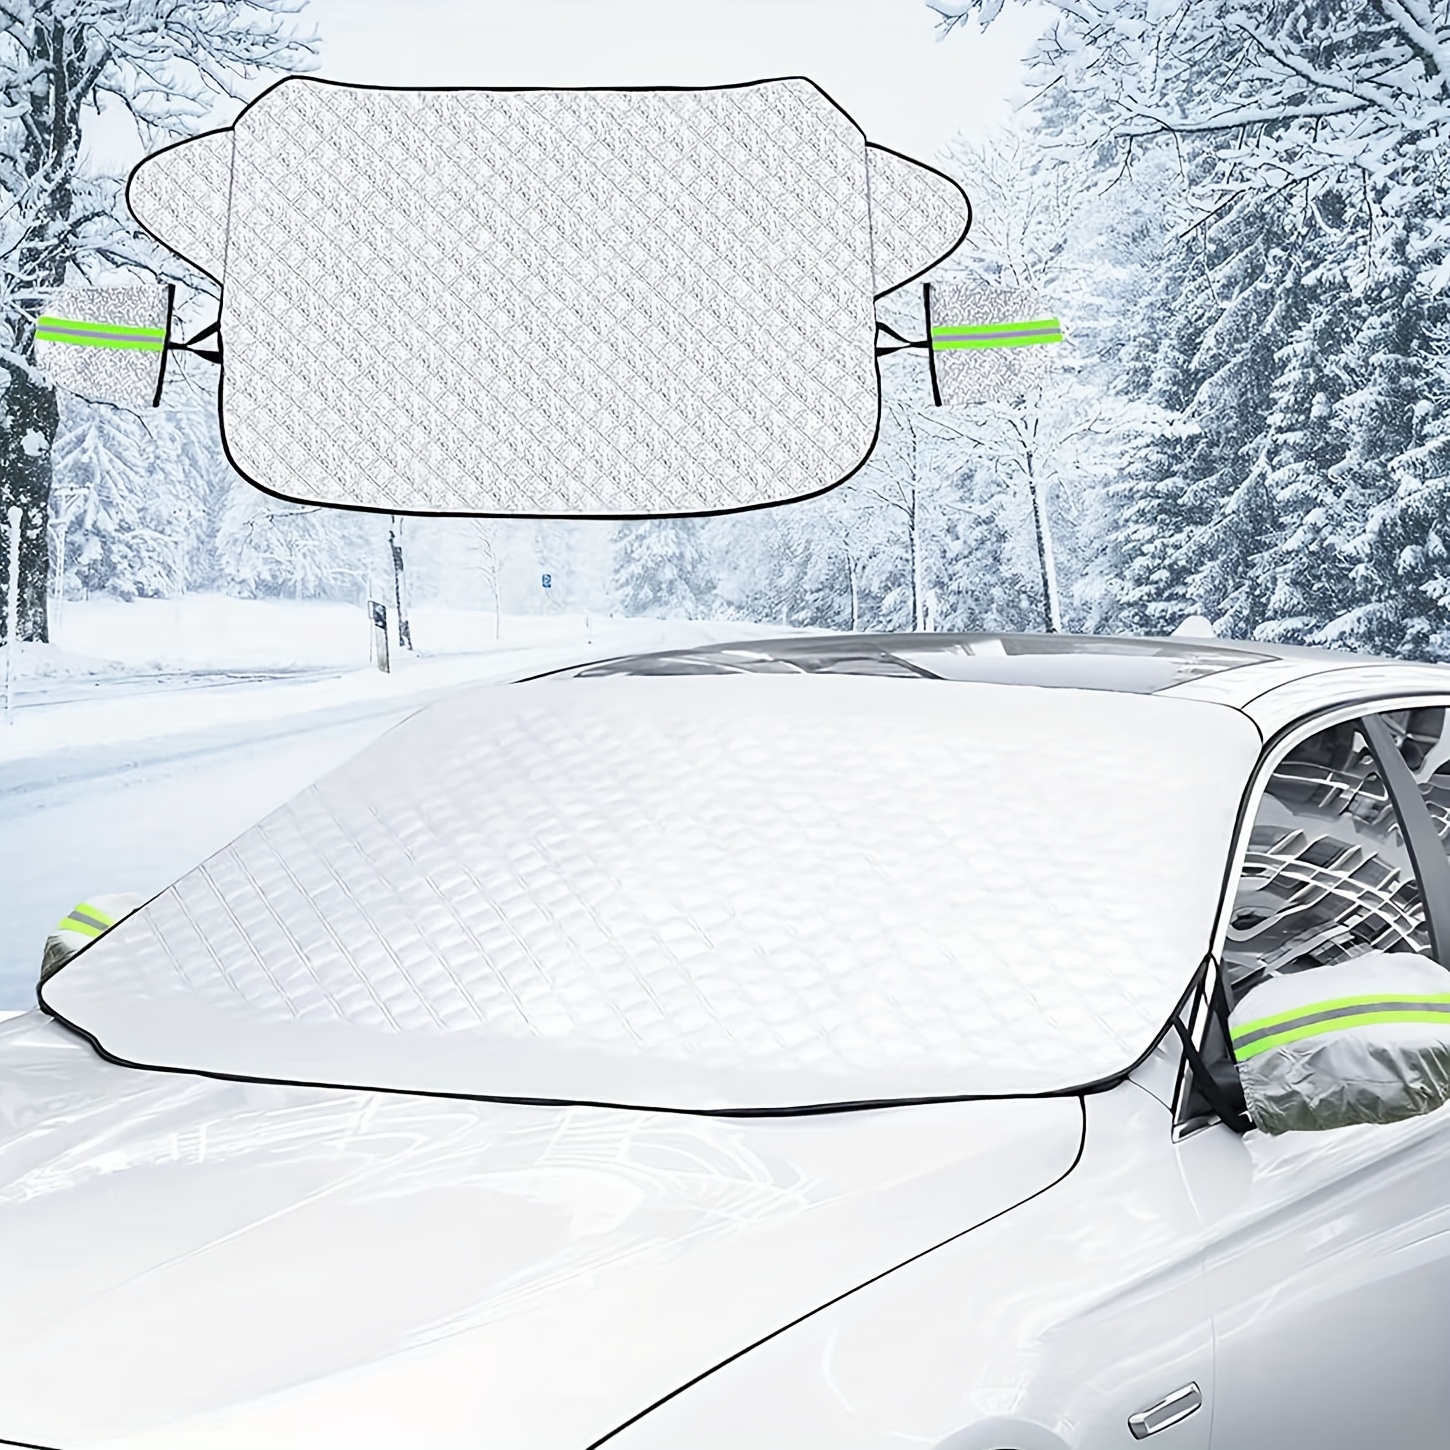 SNOW SHADE CAR WINDSHIELD COVER WINTER ICE FOIL WINDSCREEN FROST DUST COVER  SUN PROTECTOR FRONT WINDOW SCREEN ANTI-ICE FITS UV MOST CARS